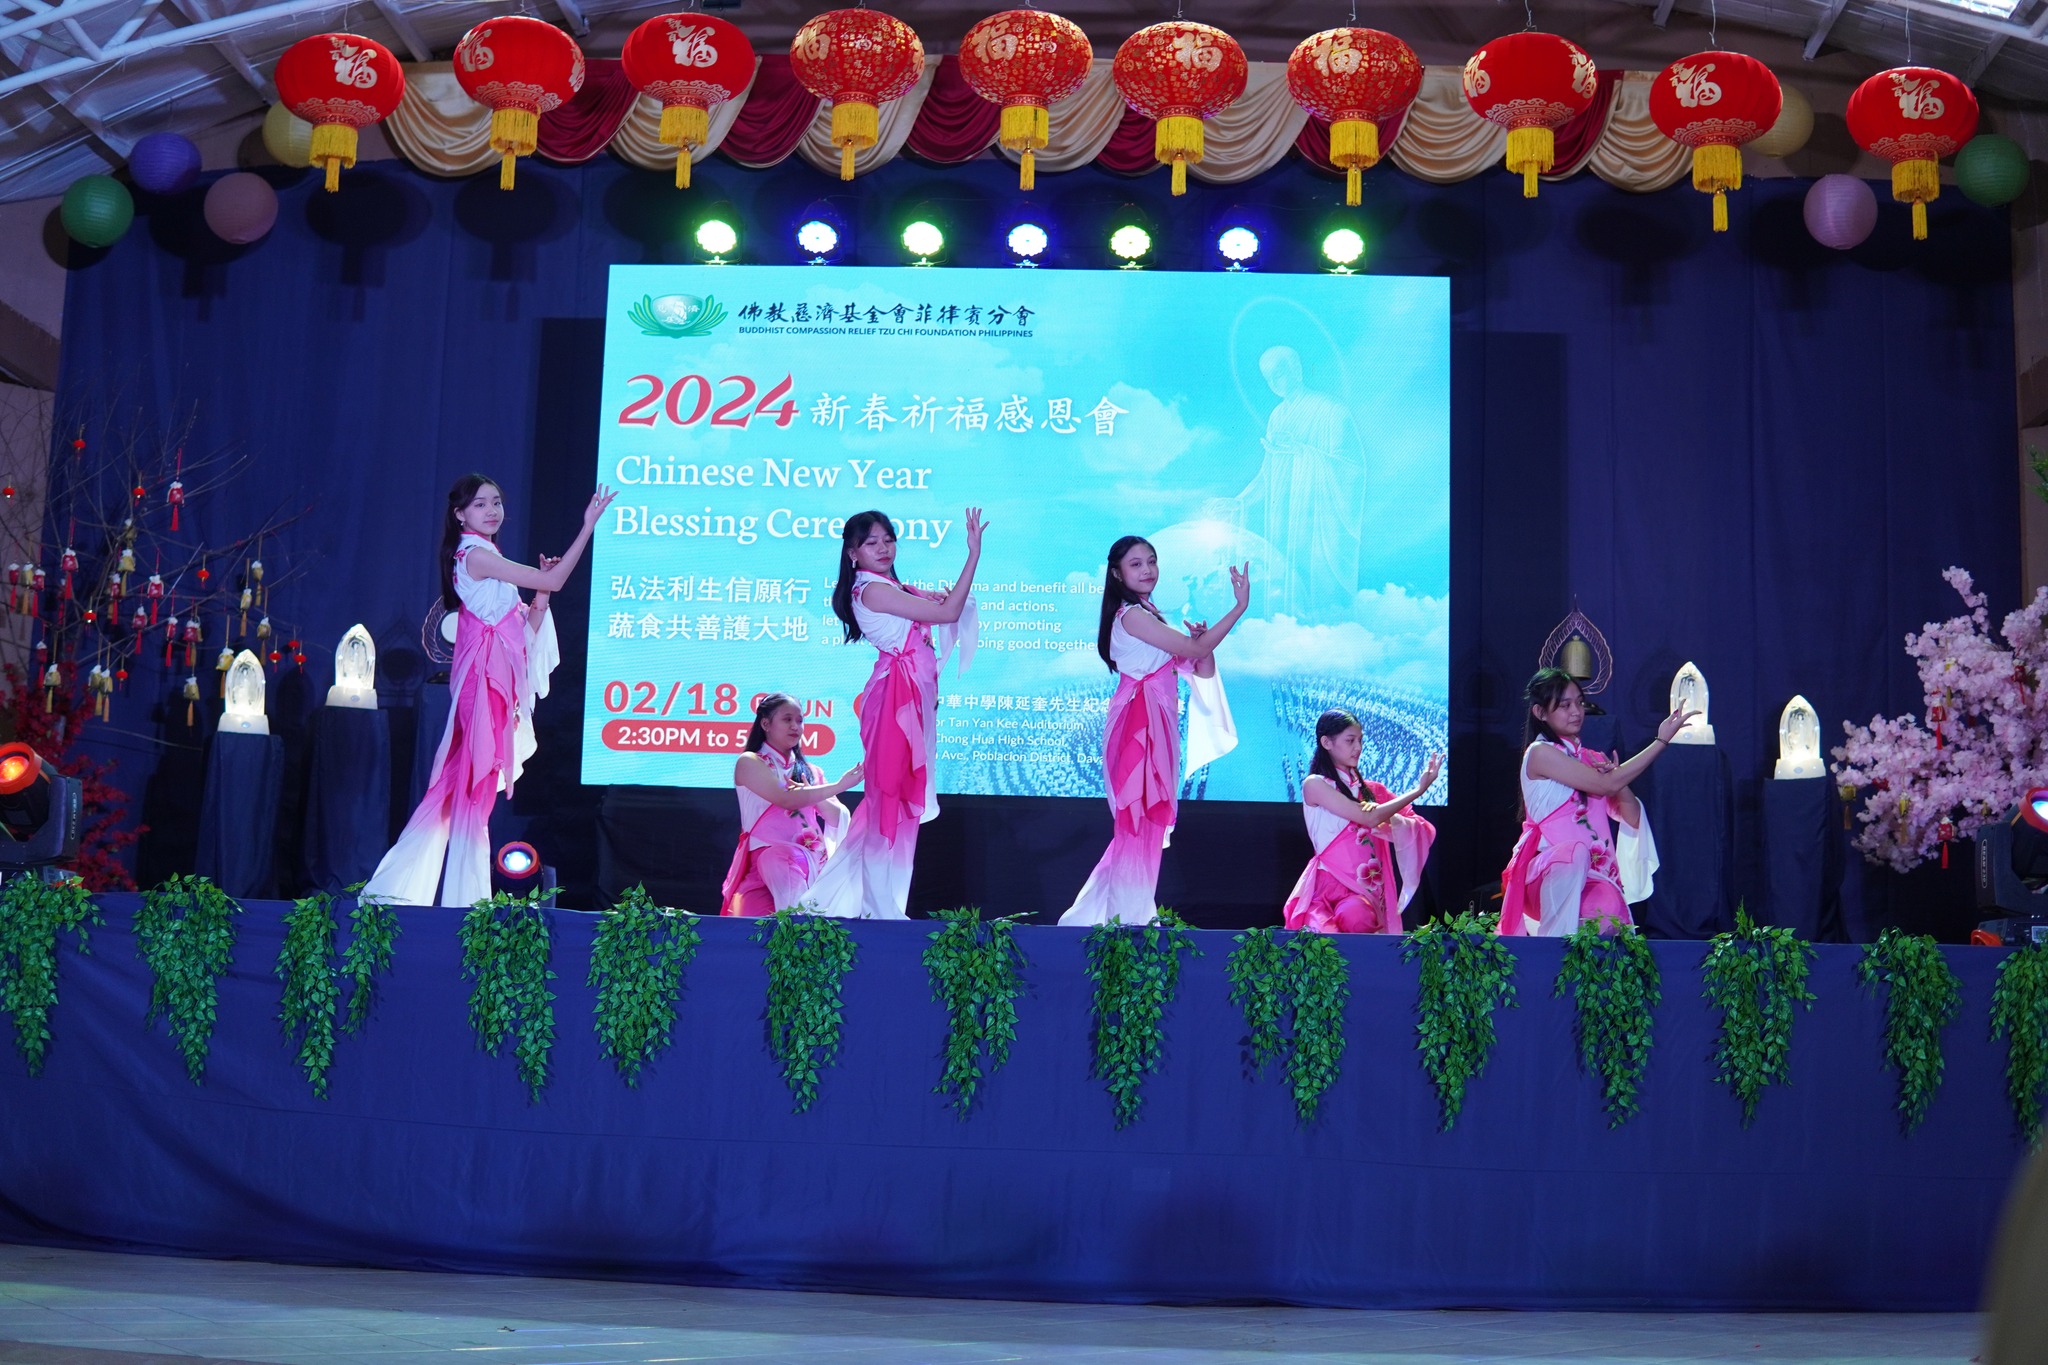 Davao Chung Hua High School students are gracefully showing their talents in dancing.【Photo by Tzu Chi Davao】